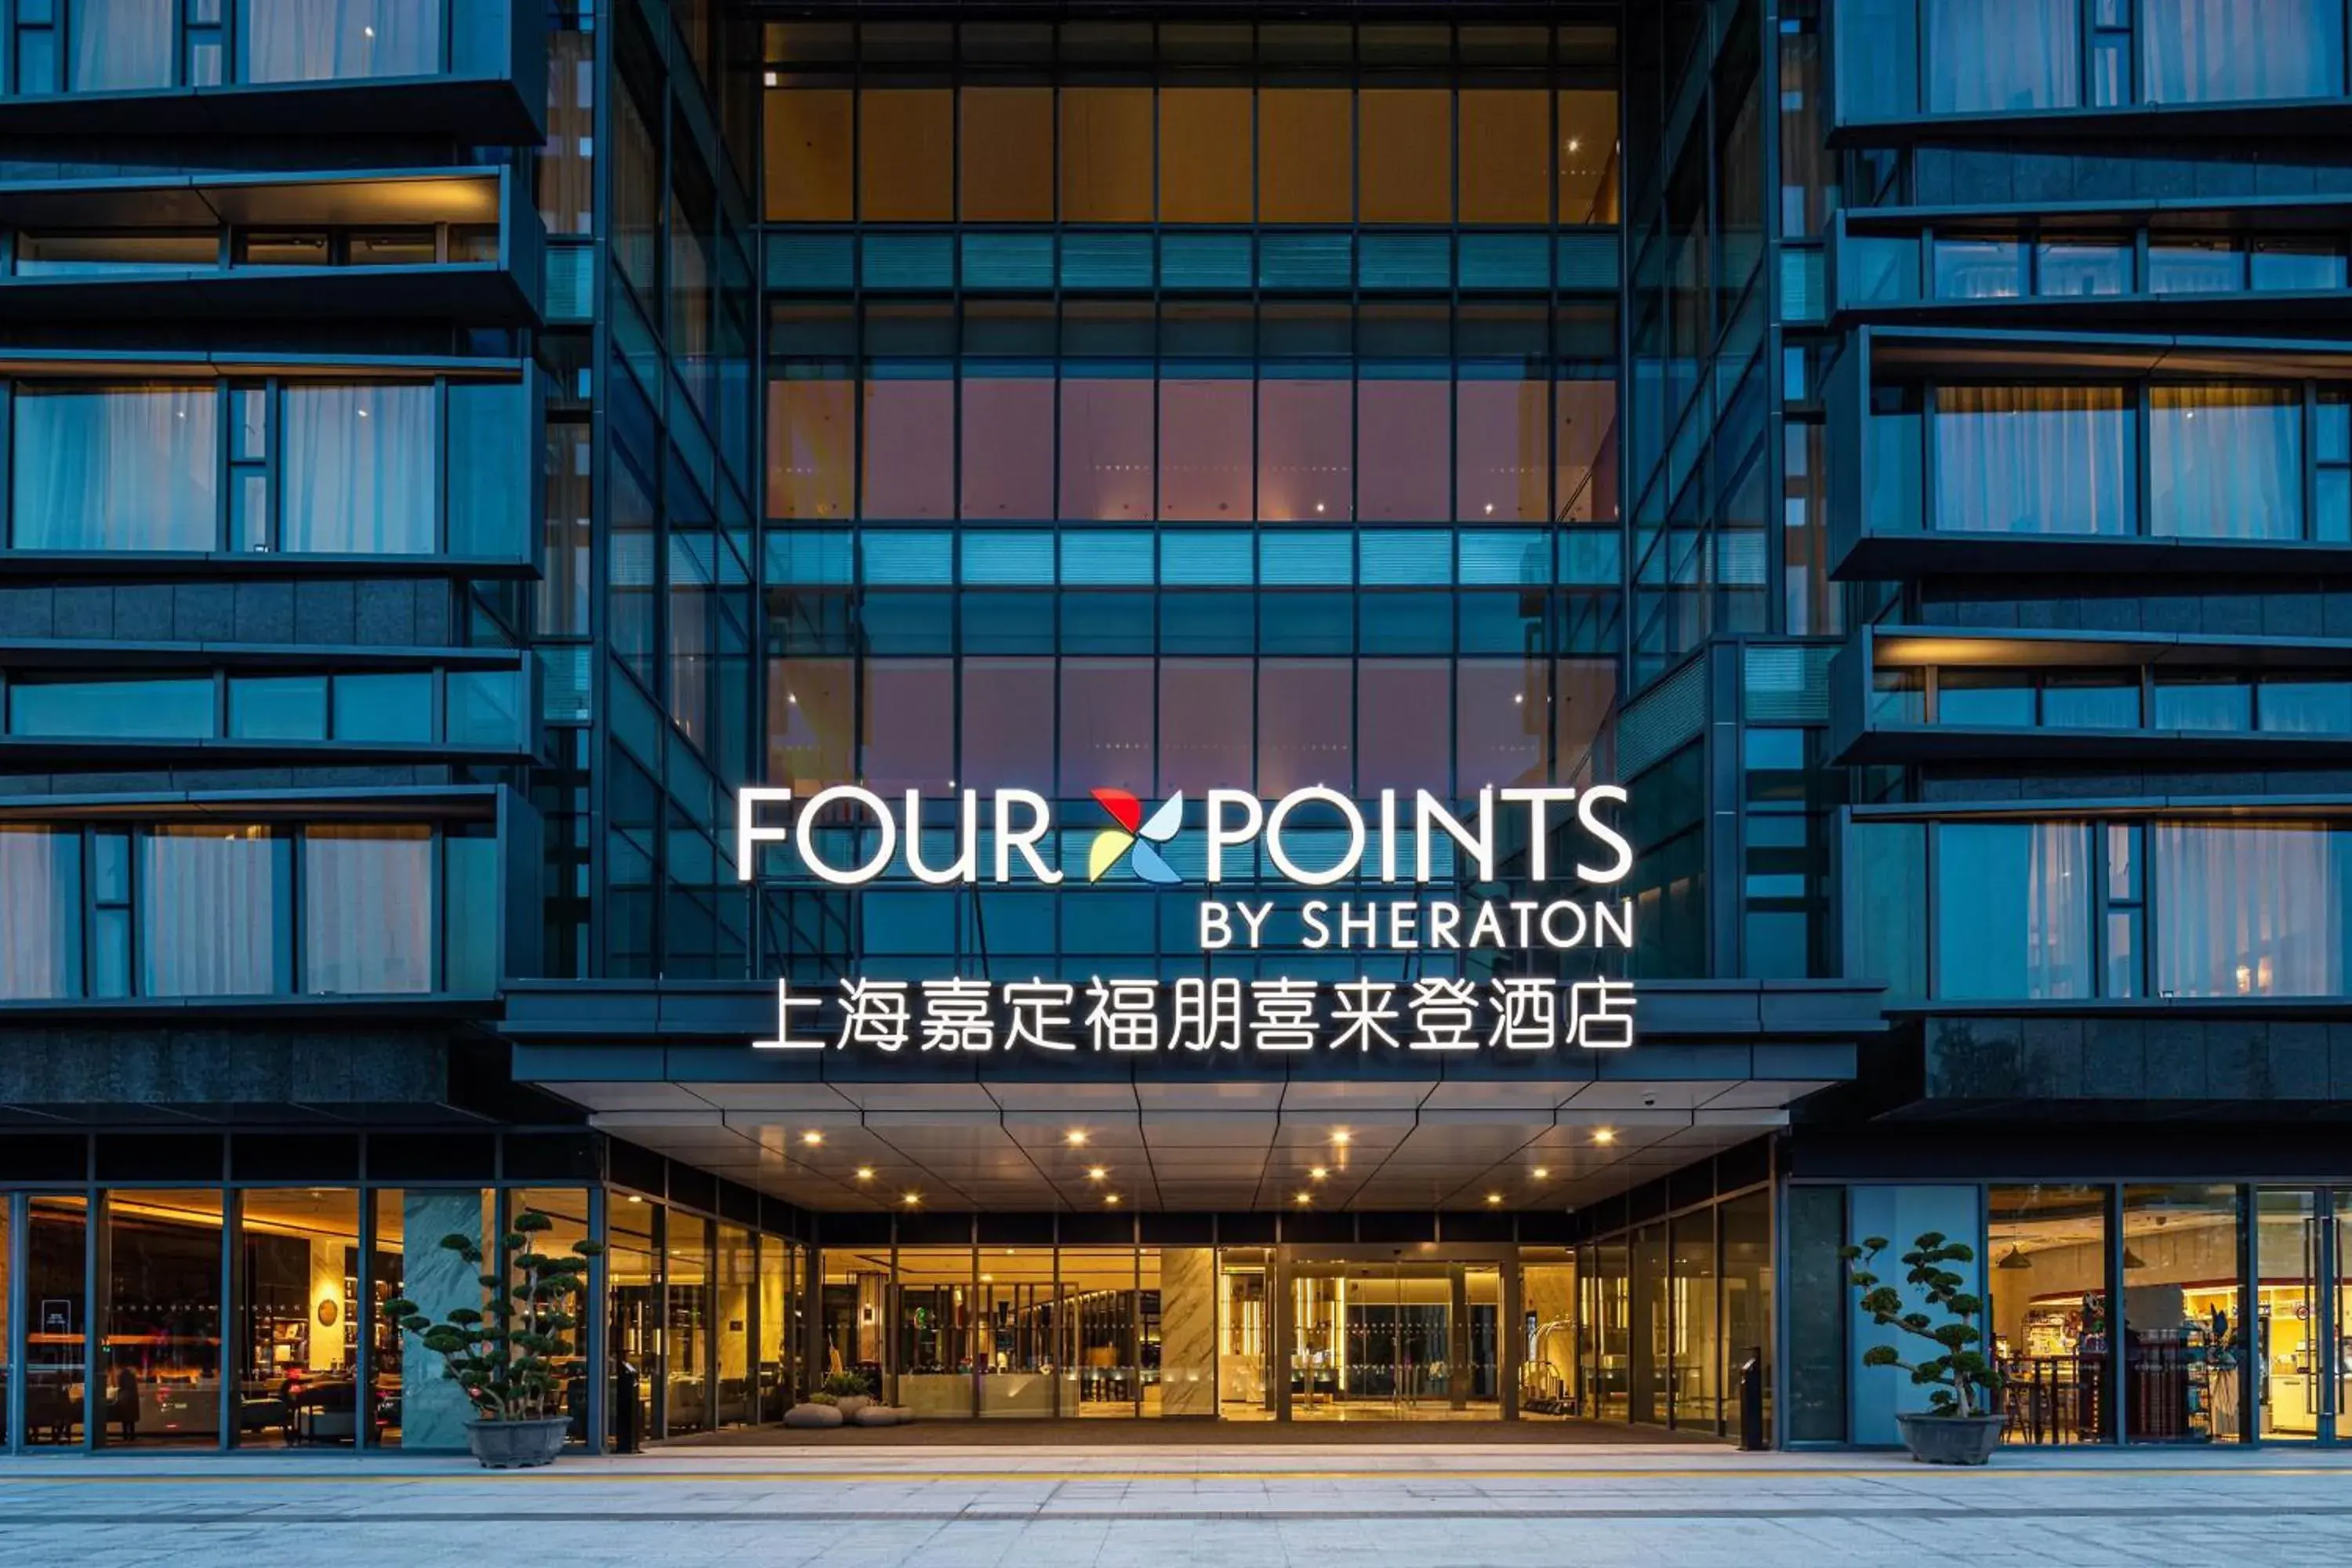 Property building in Four Points by Sheraton Shanghai Jiading